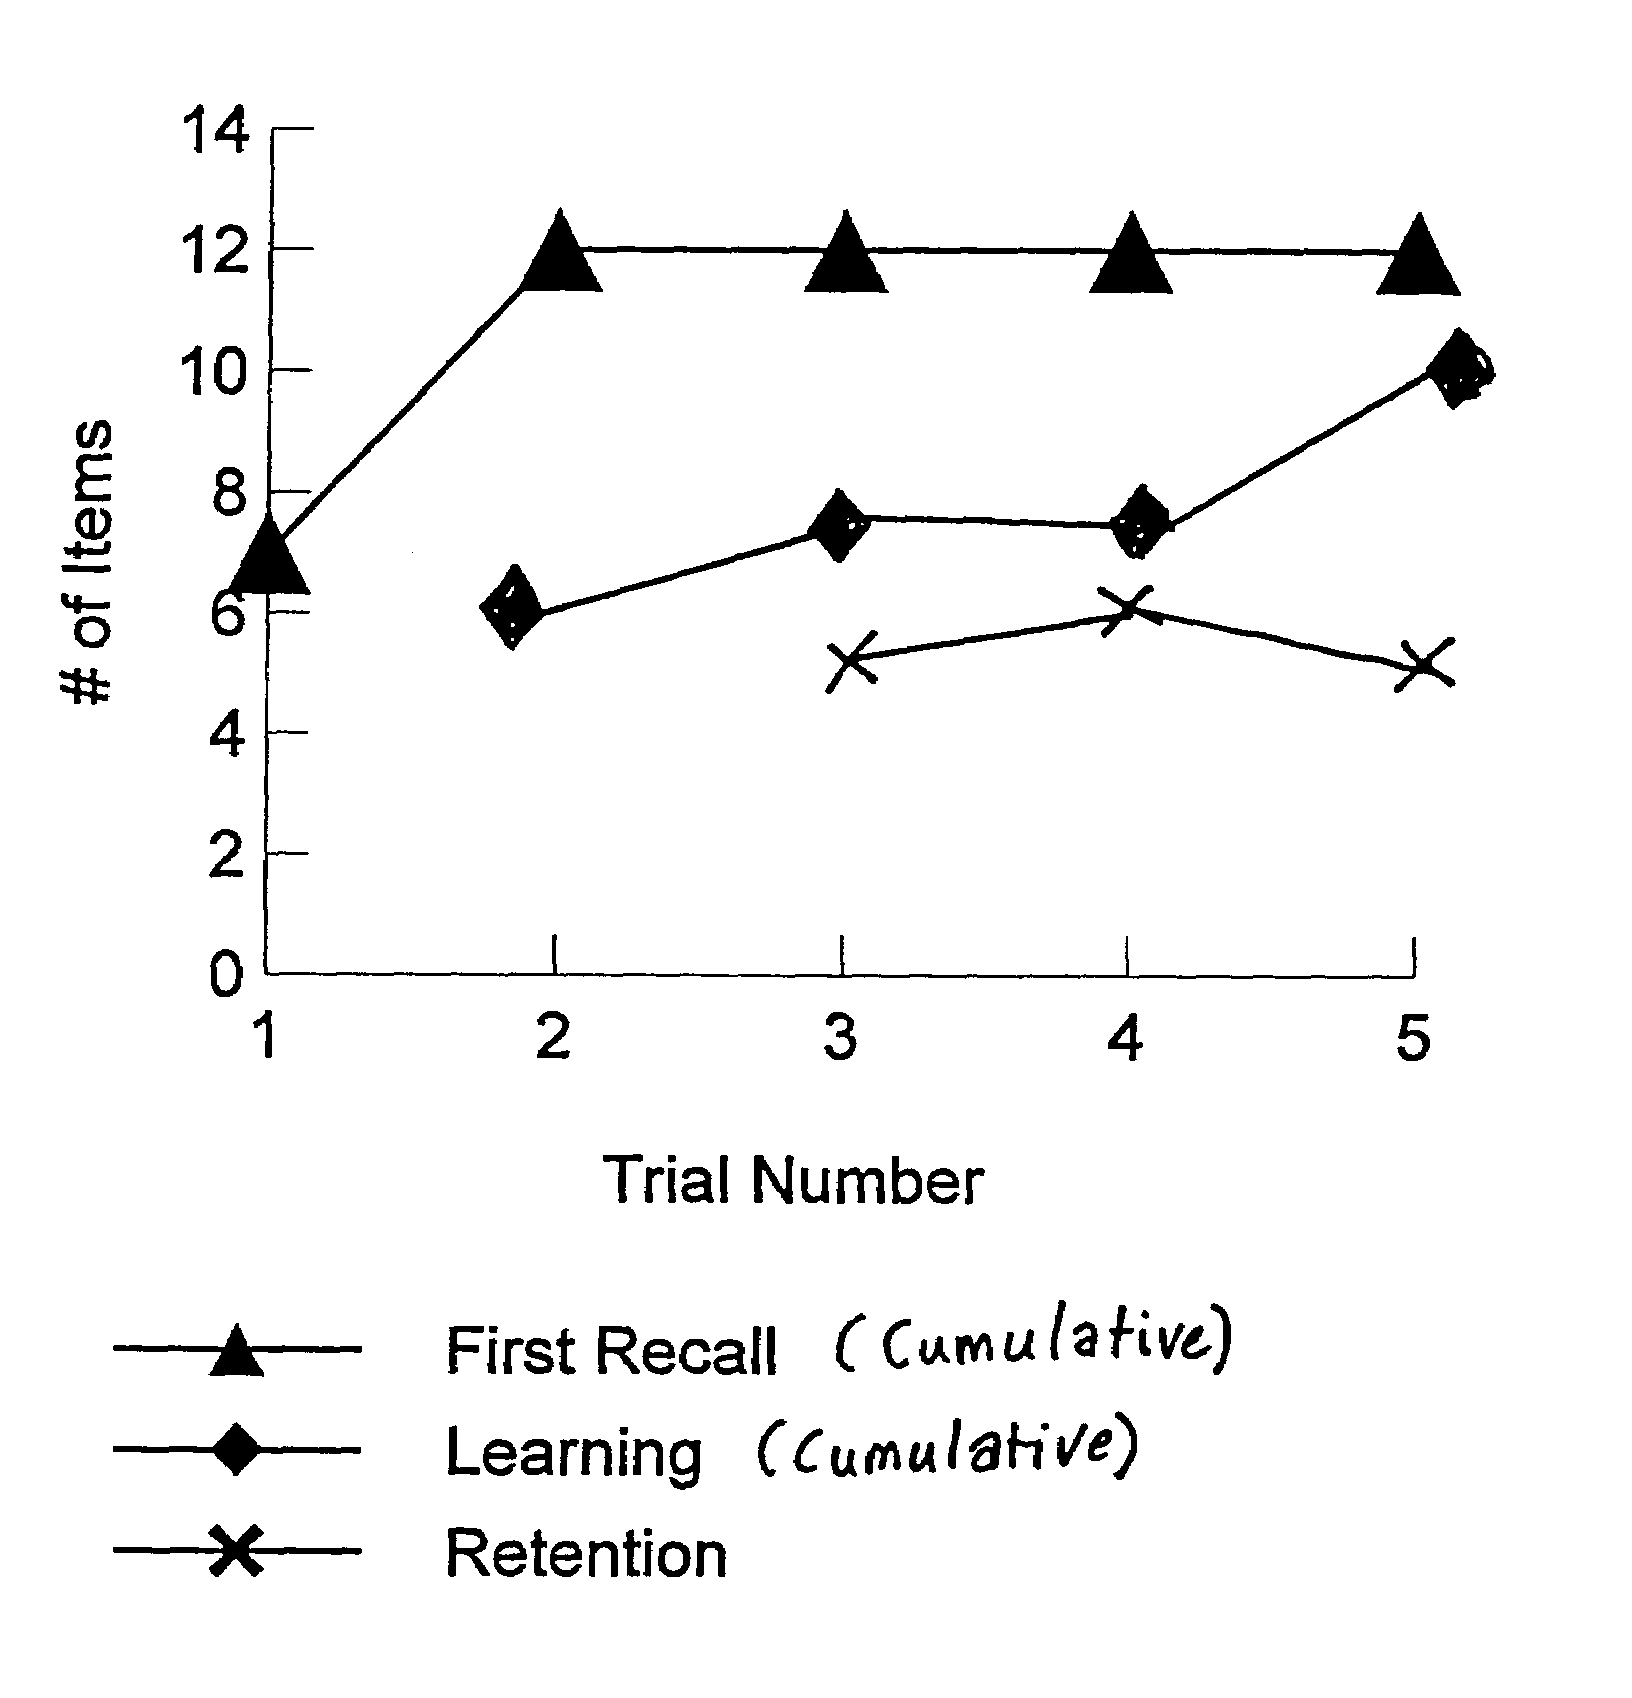 Memory tests using item-specific weighted memory measurements and uses thereof